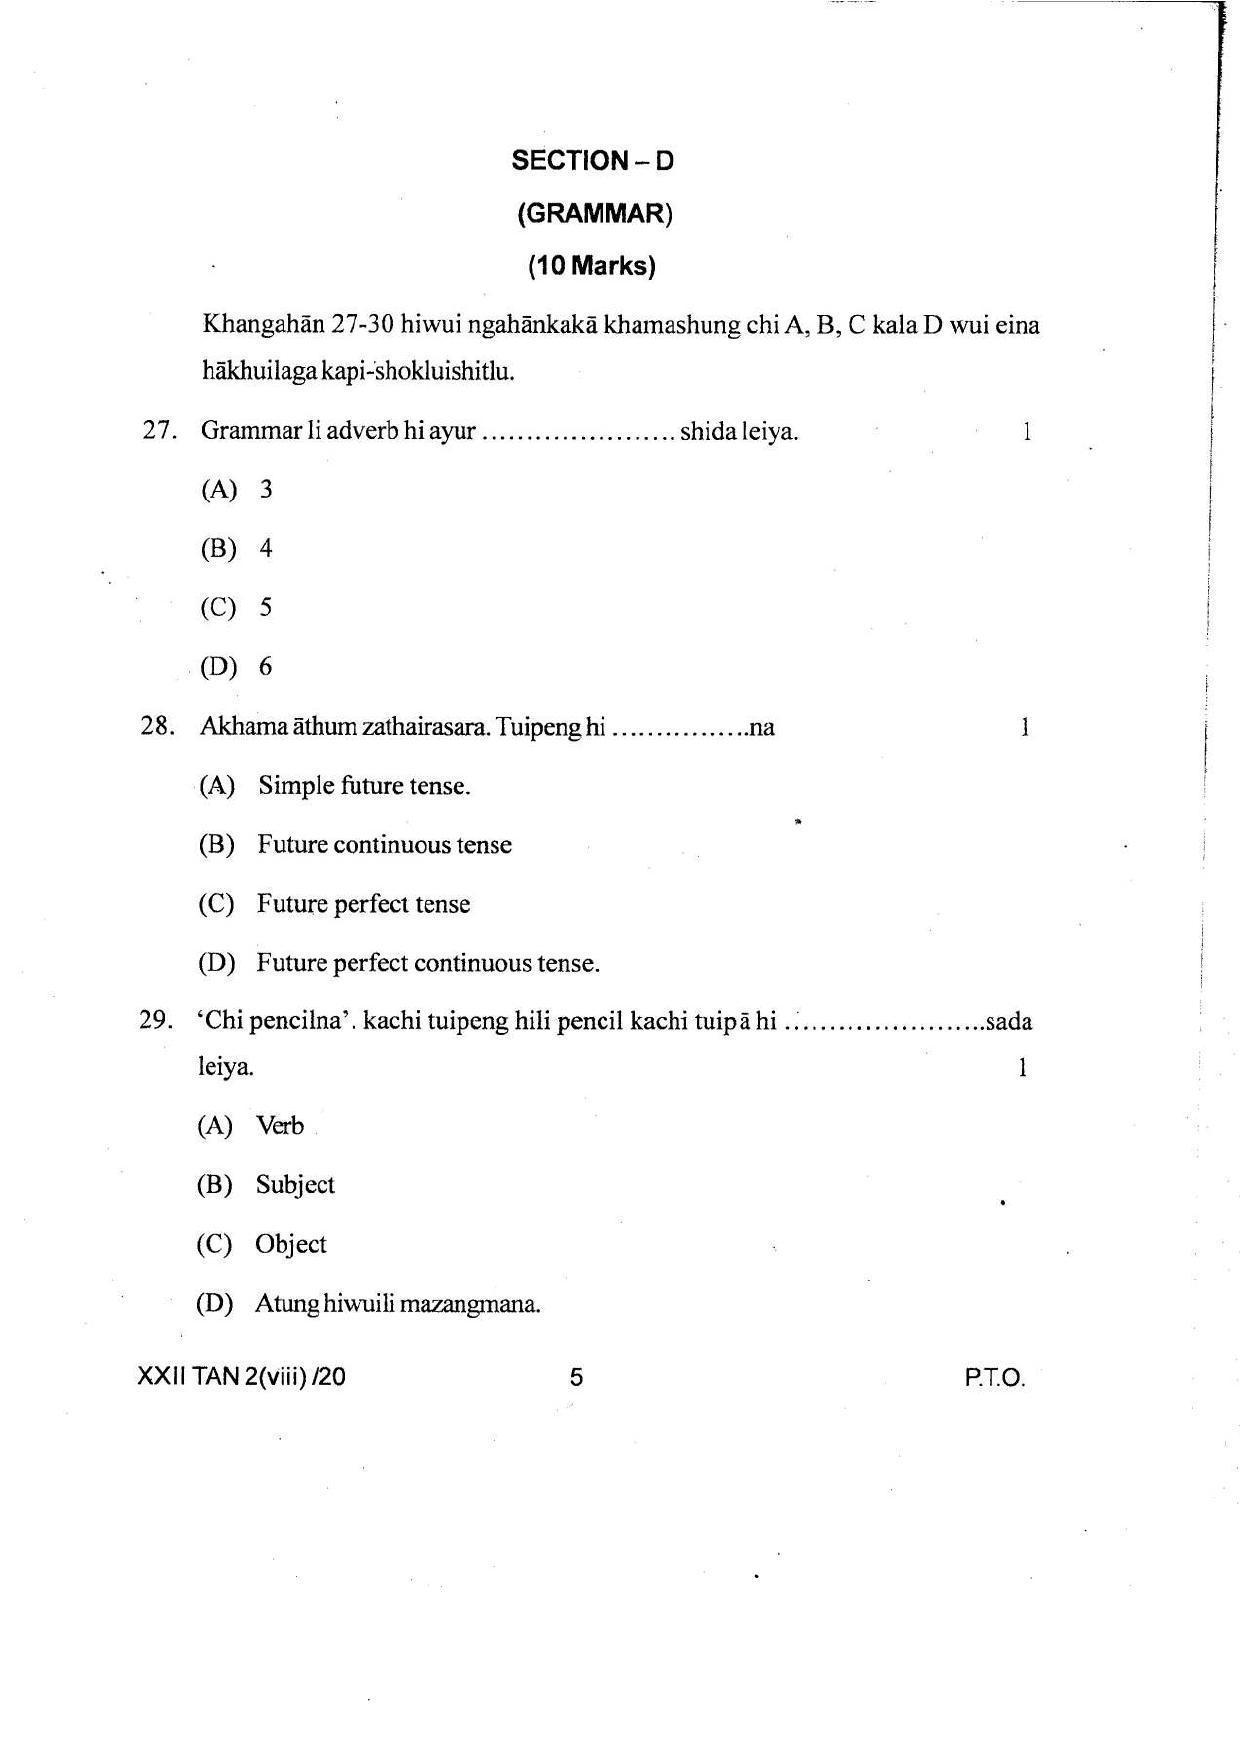 COHSEM Class 12 Tangkhul Question Papers 2020 - Page 5